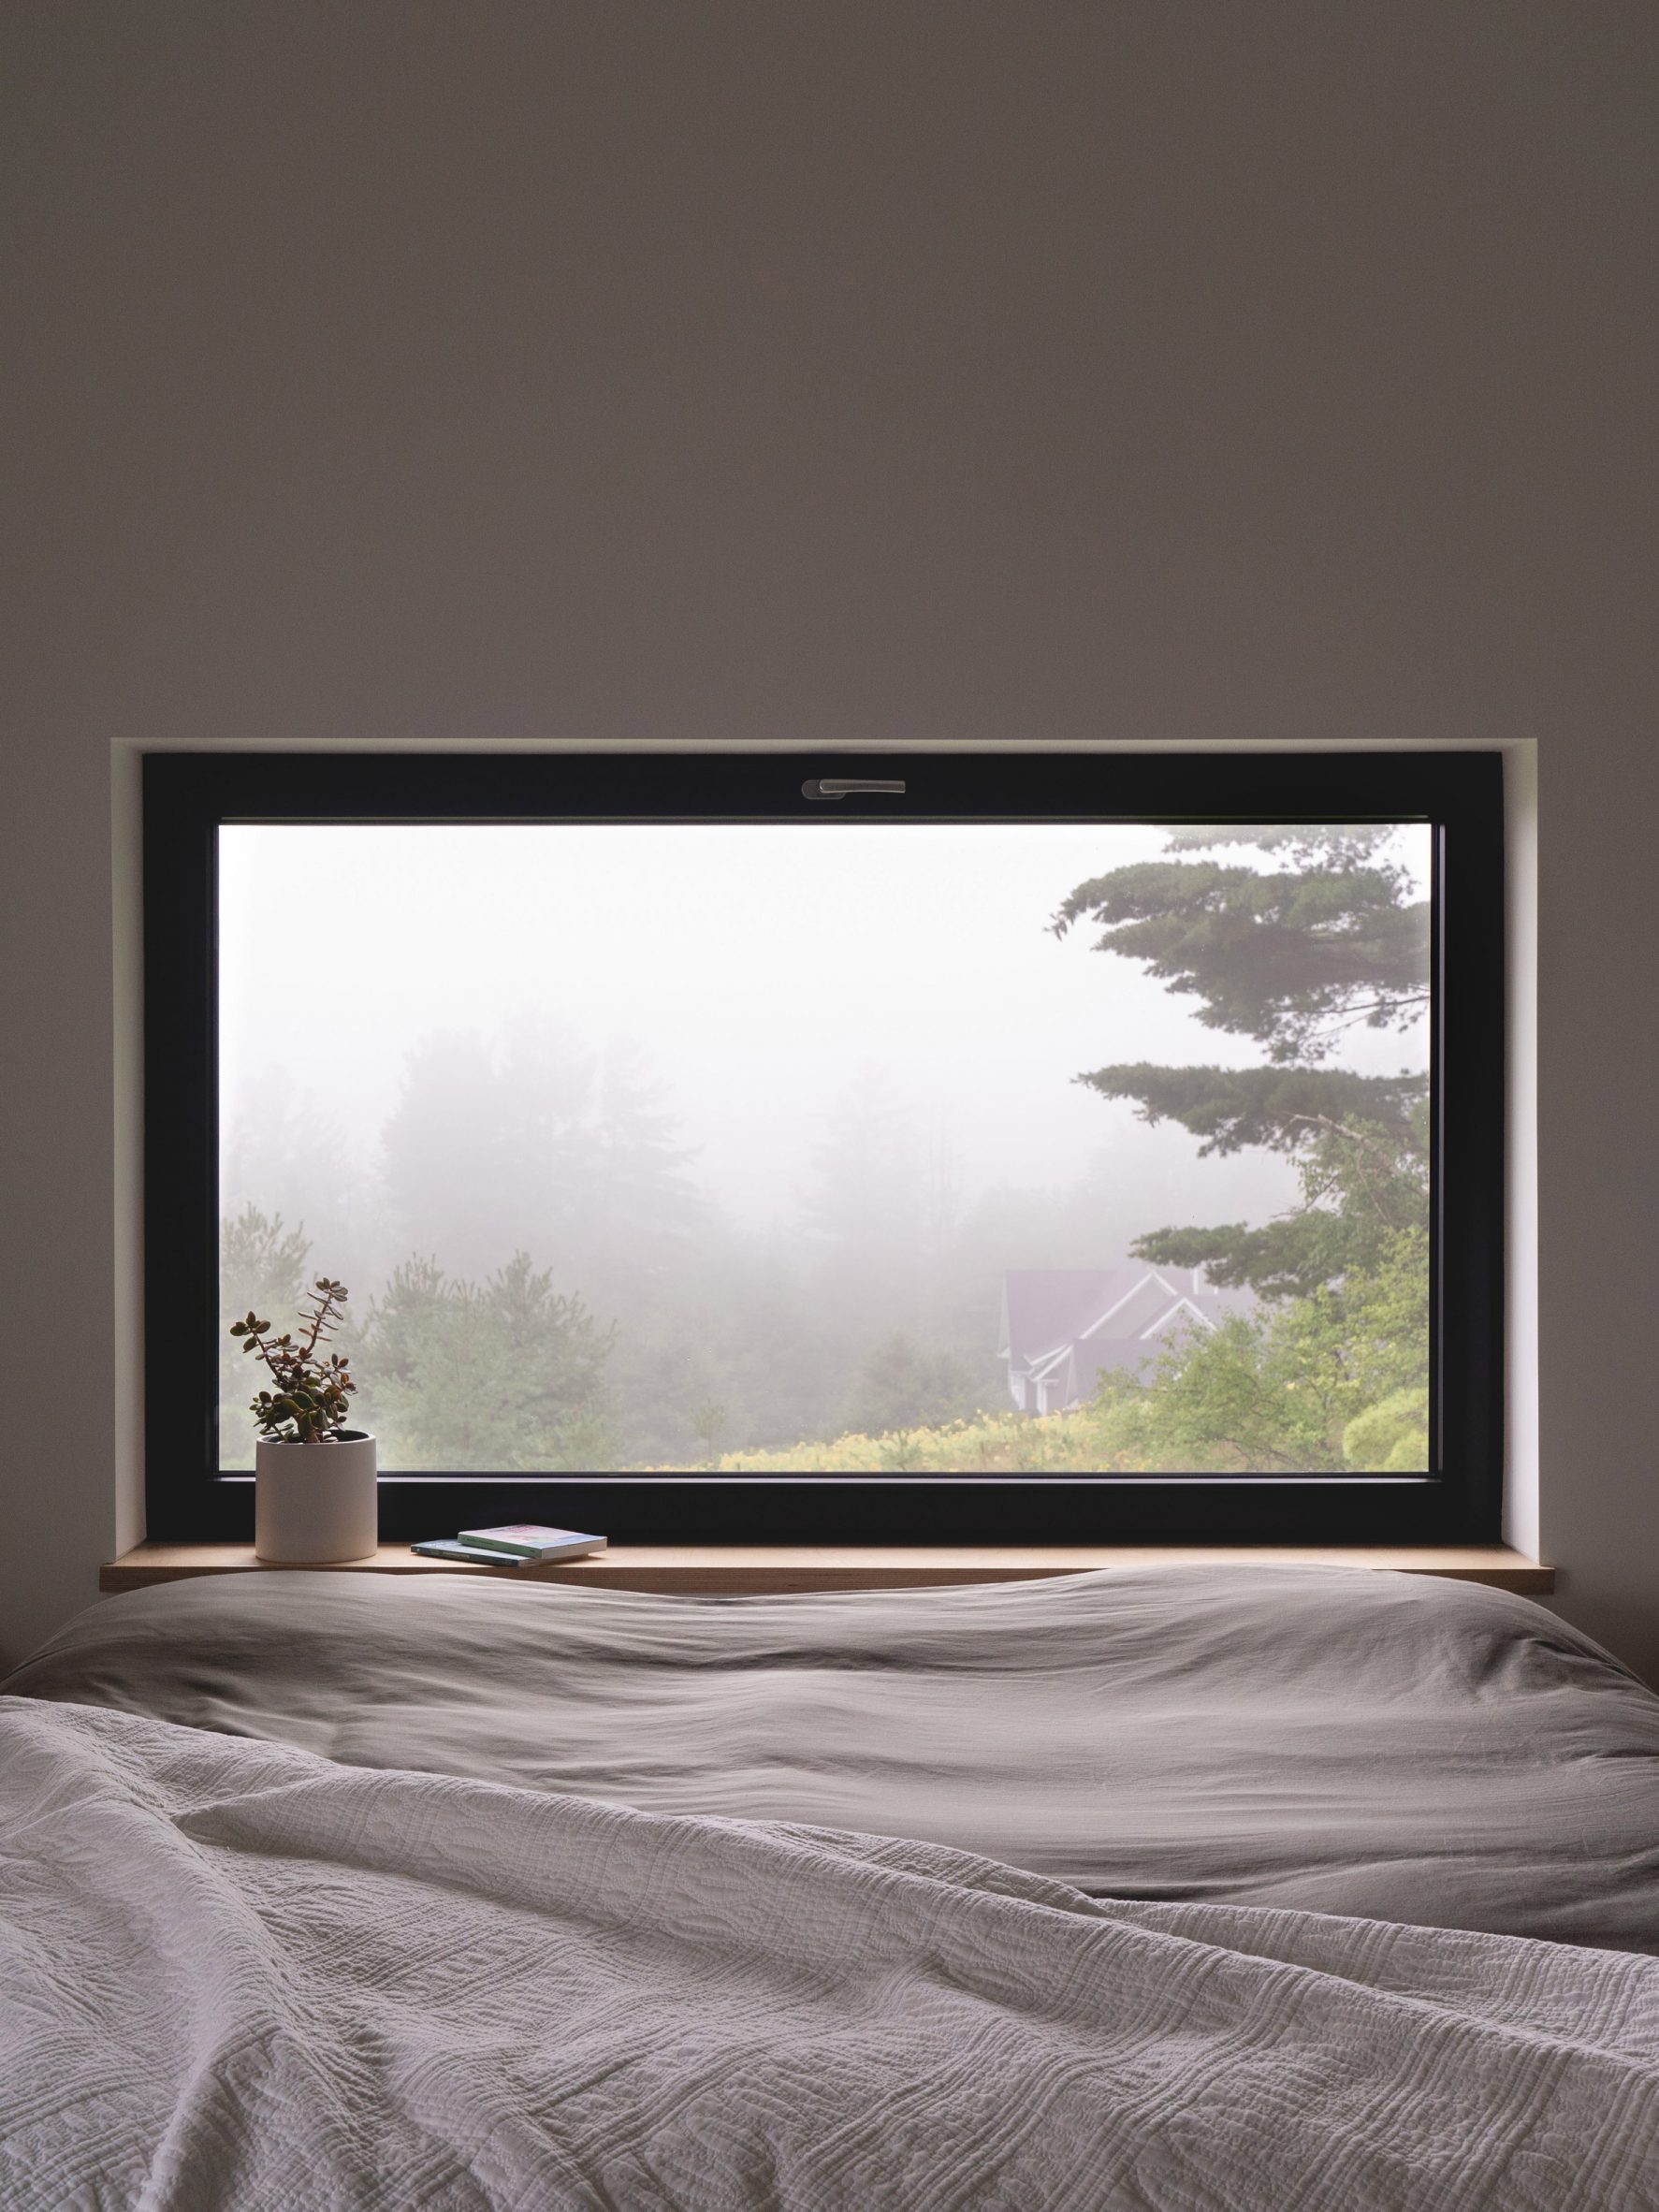 Bedroom window with misty view